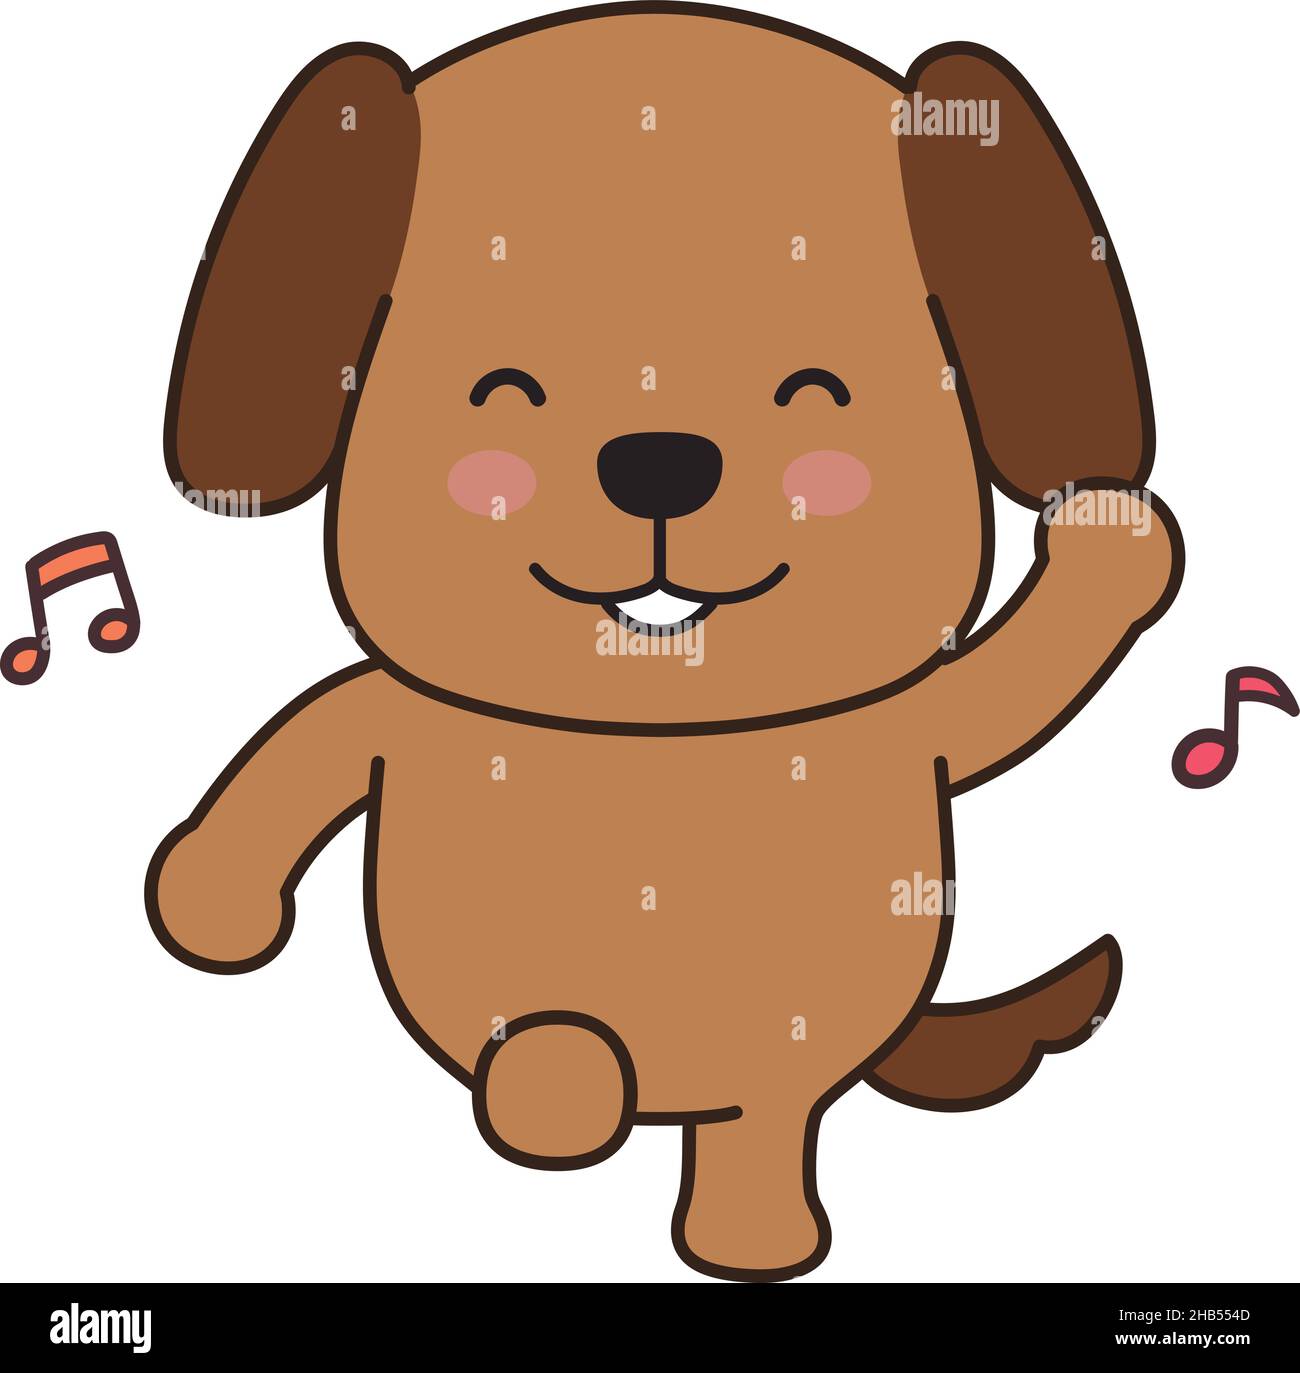 animated free gif: animals dog music animated funny pictures photo graphic  clipart ppt power point background mobile screensaver wallpaper pc mac i  love music dance pop rock disco hip hop dj bar